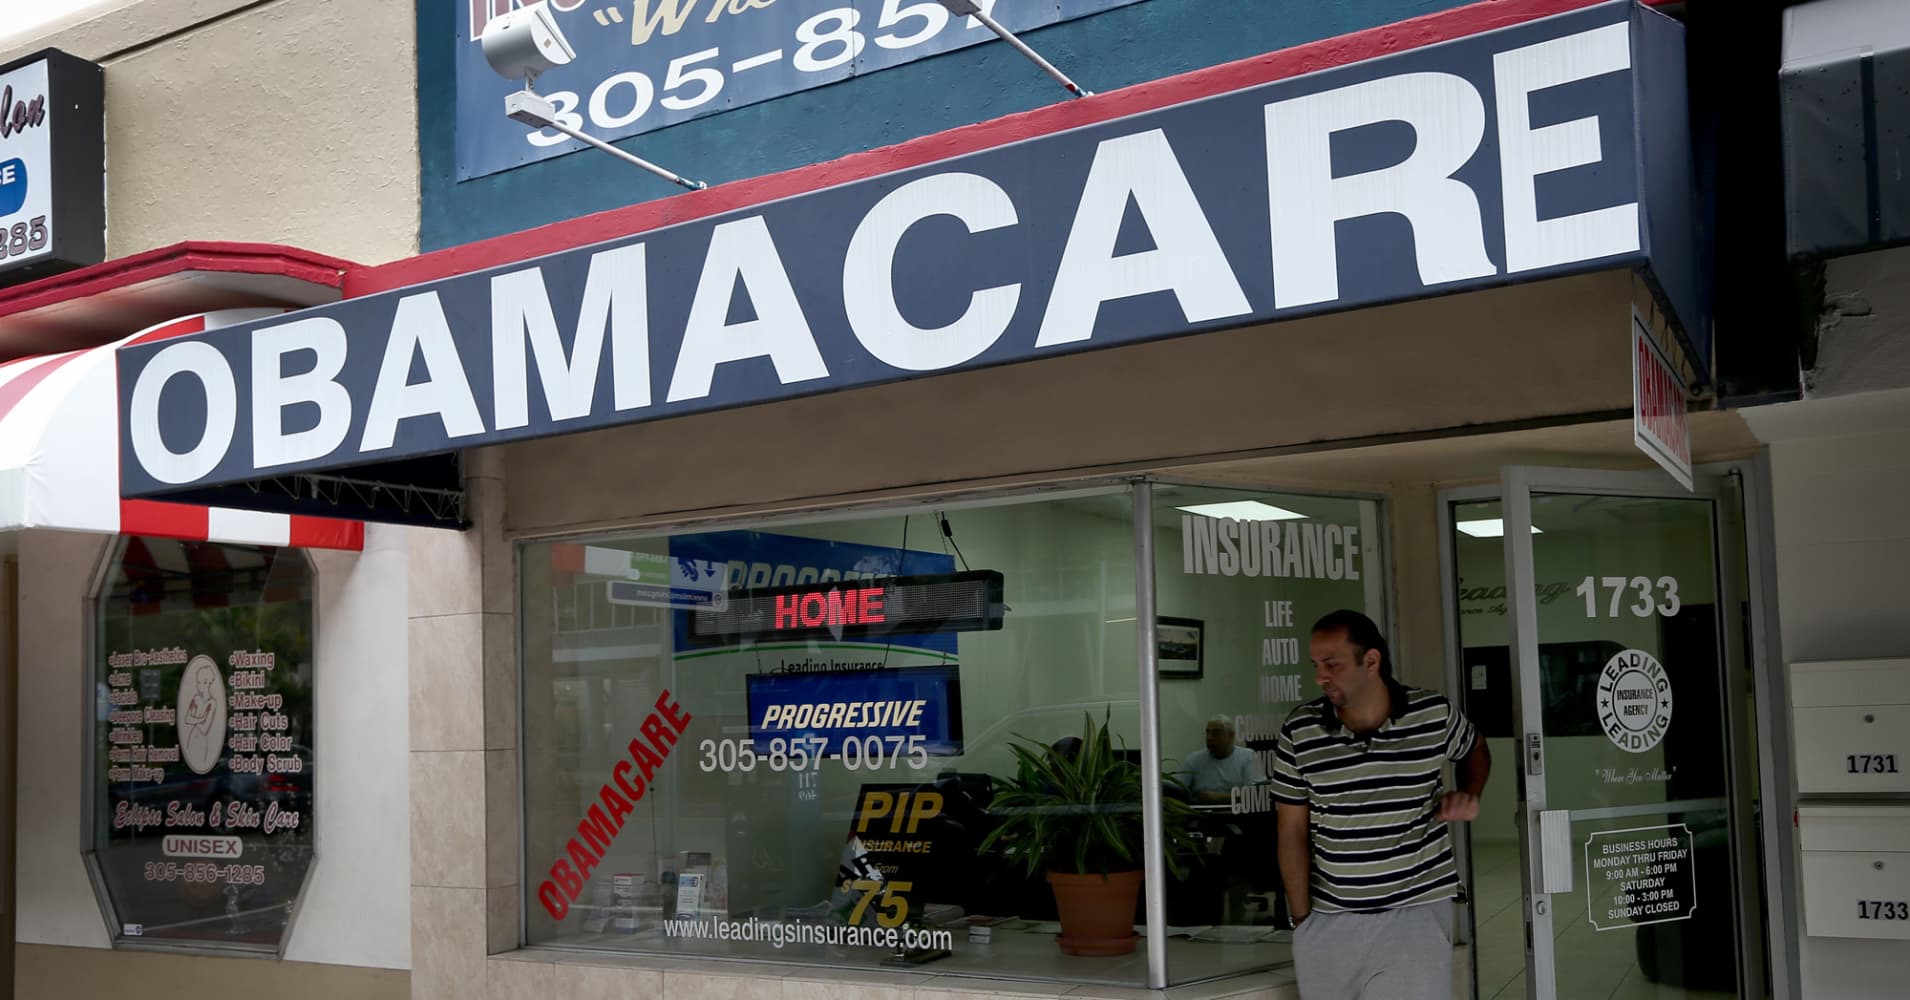 Tax preparers help clients with Obamacare